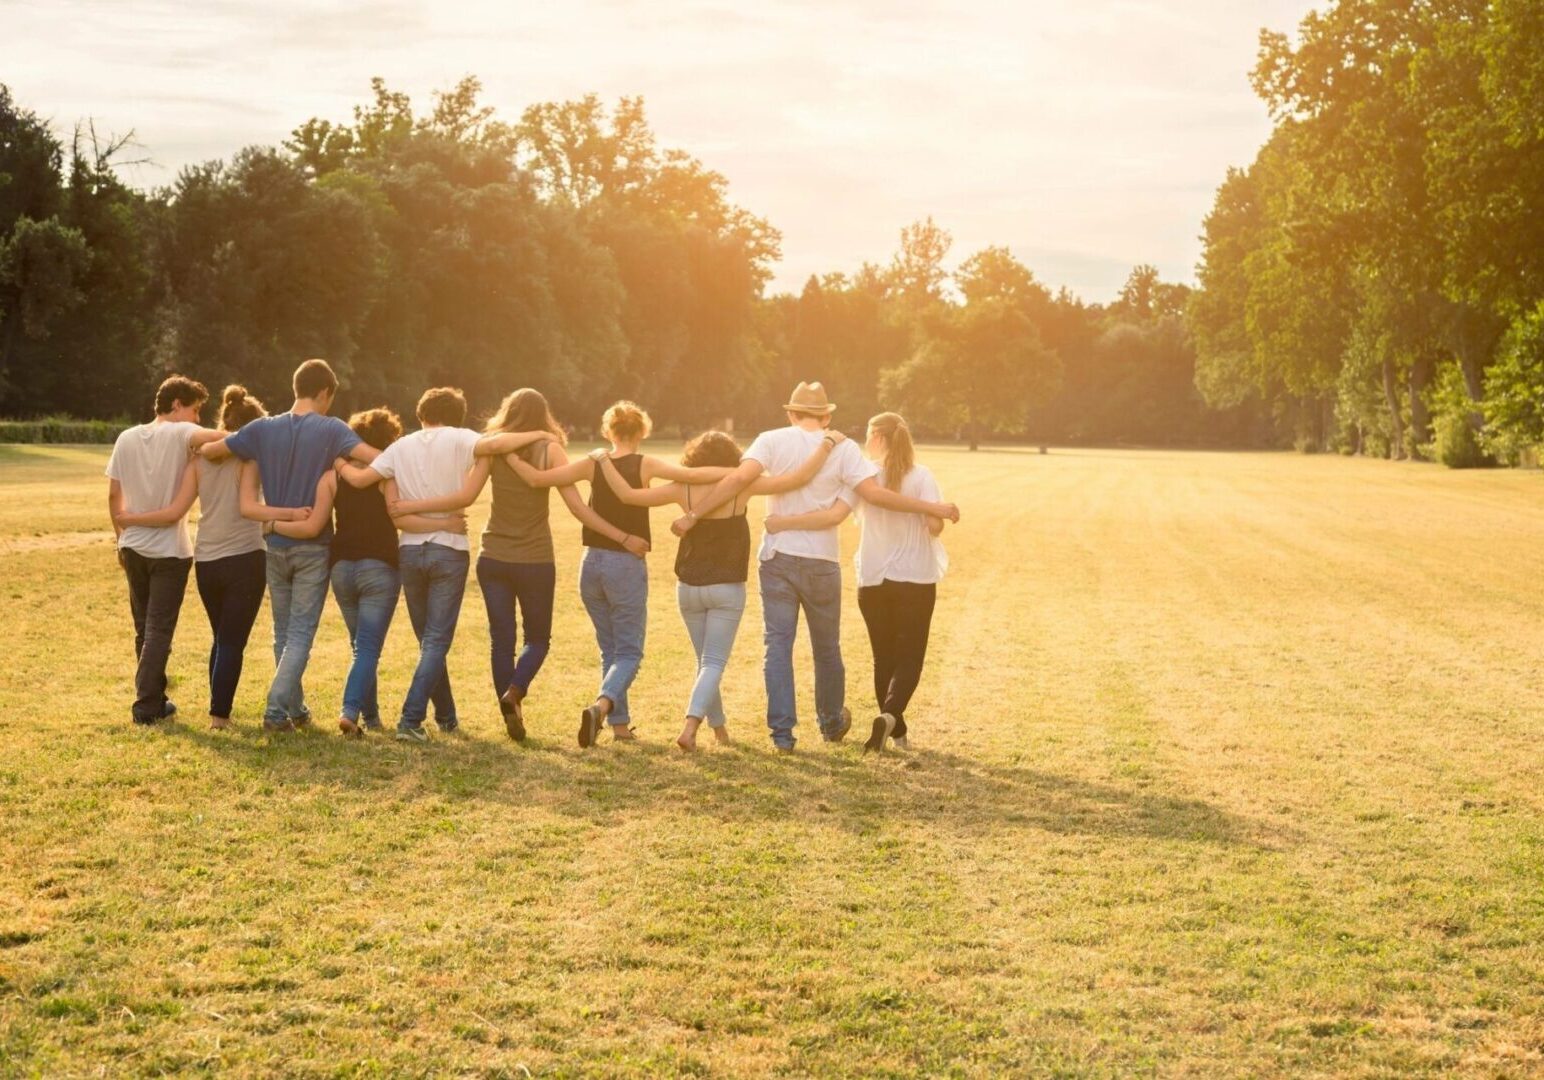 A group of people standing in the grass with their hands around each other.